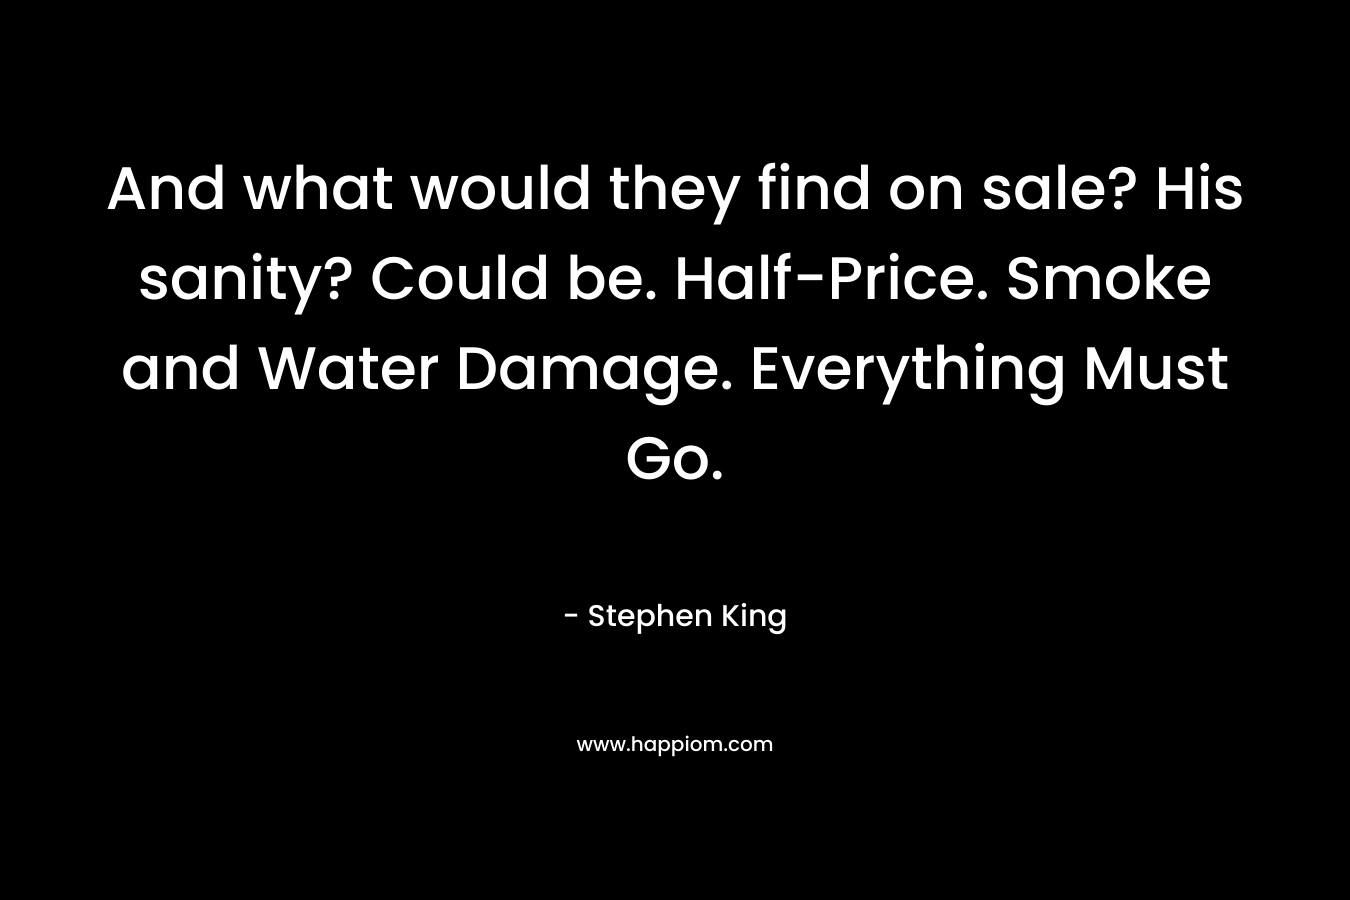 And what would they find on sale? His sanity? Could be. Half-Price. Smoke and Water Damage. Everything Must Go. – Stephen King